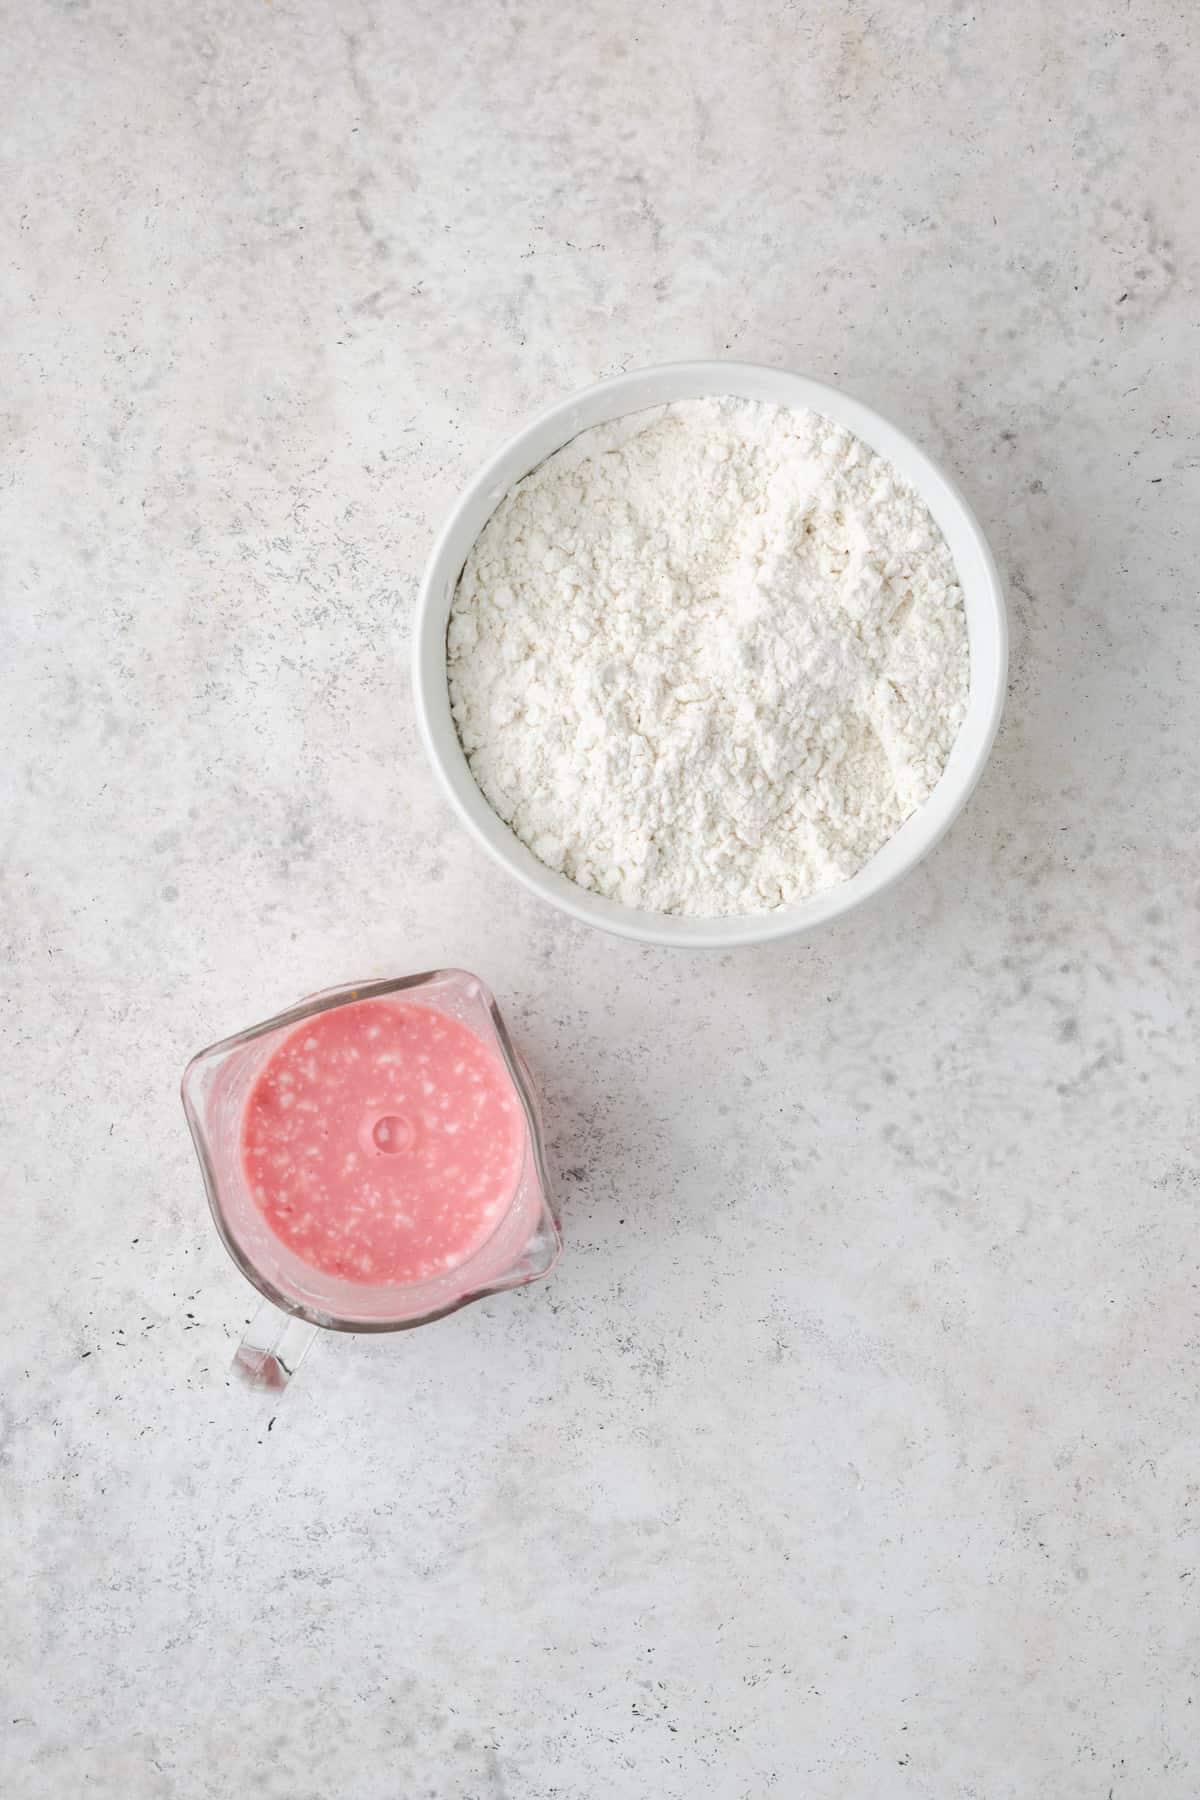 Sour cream mixed with blood orange juice next to a bowl of flour on a white table.